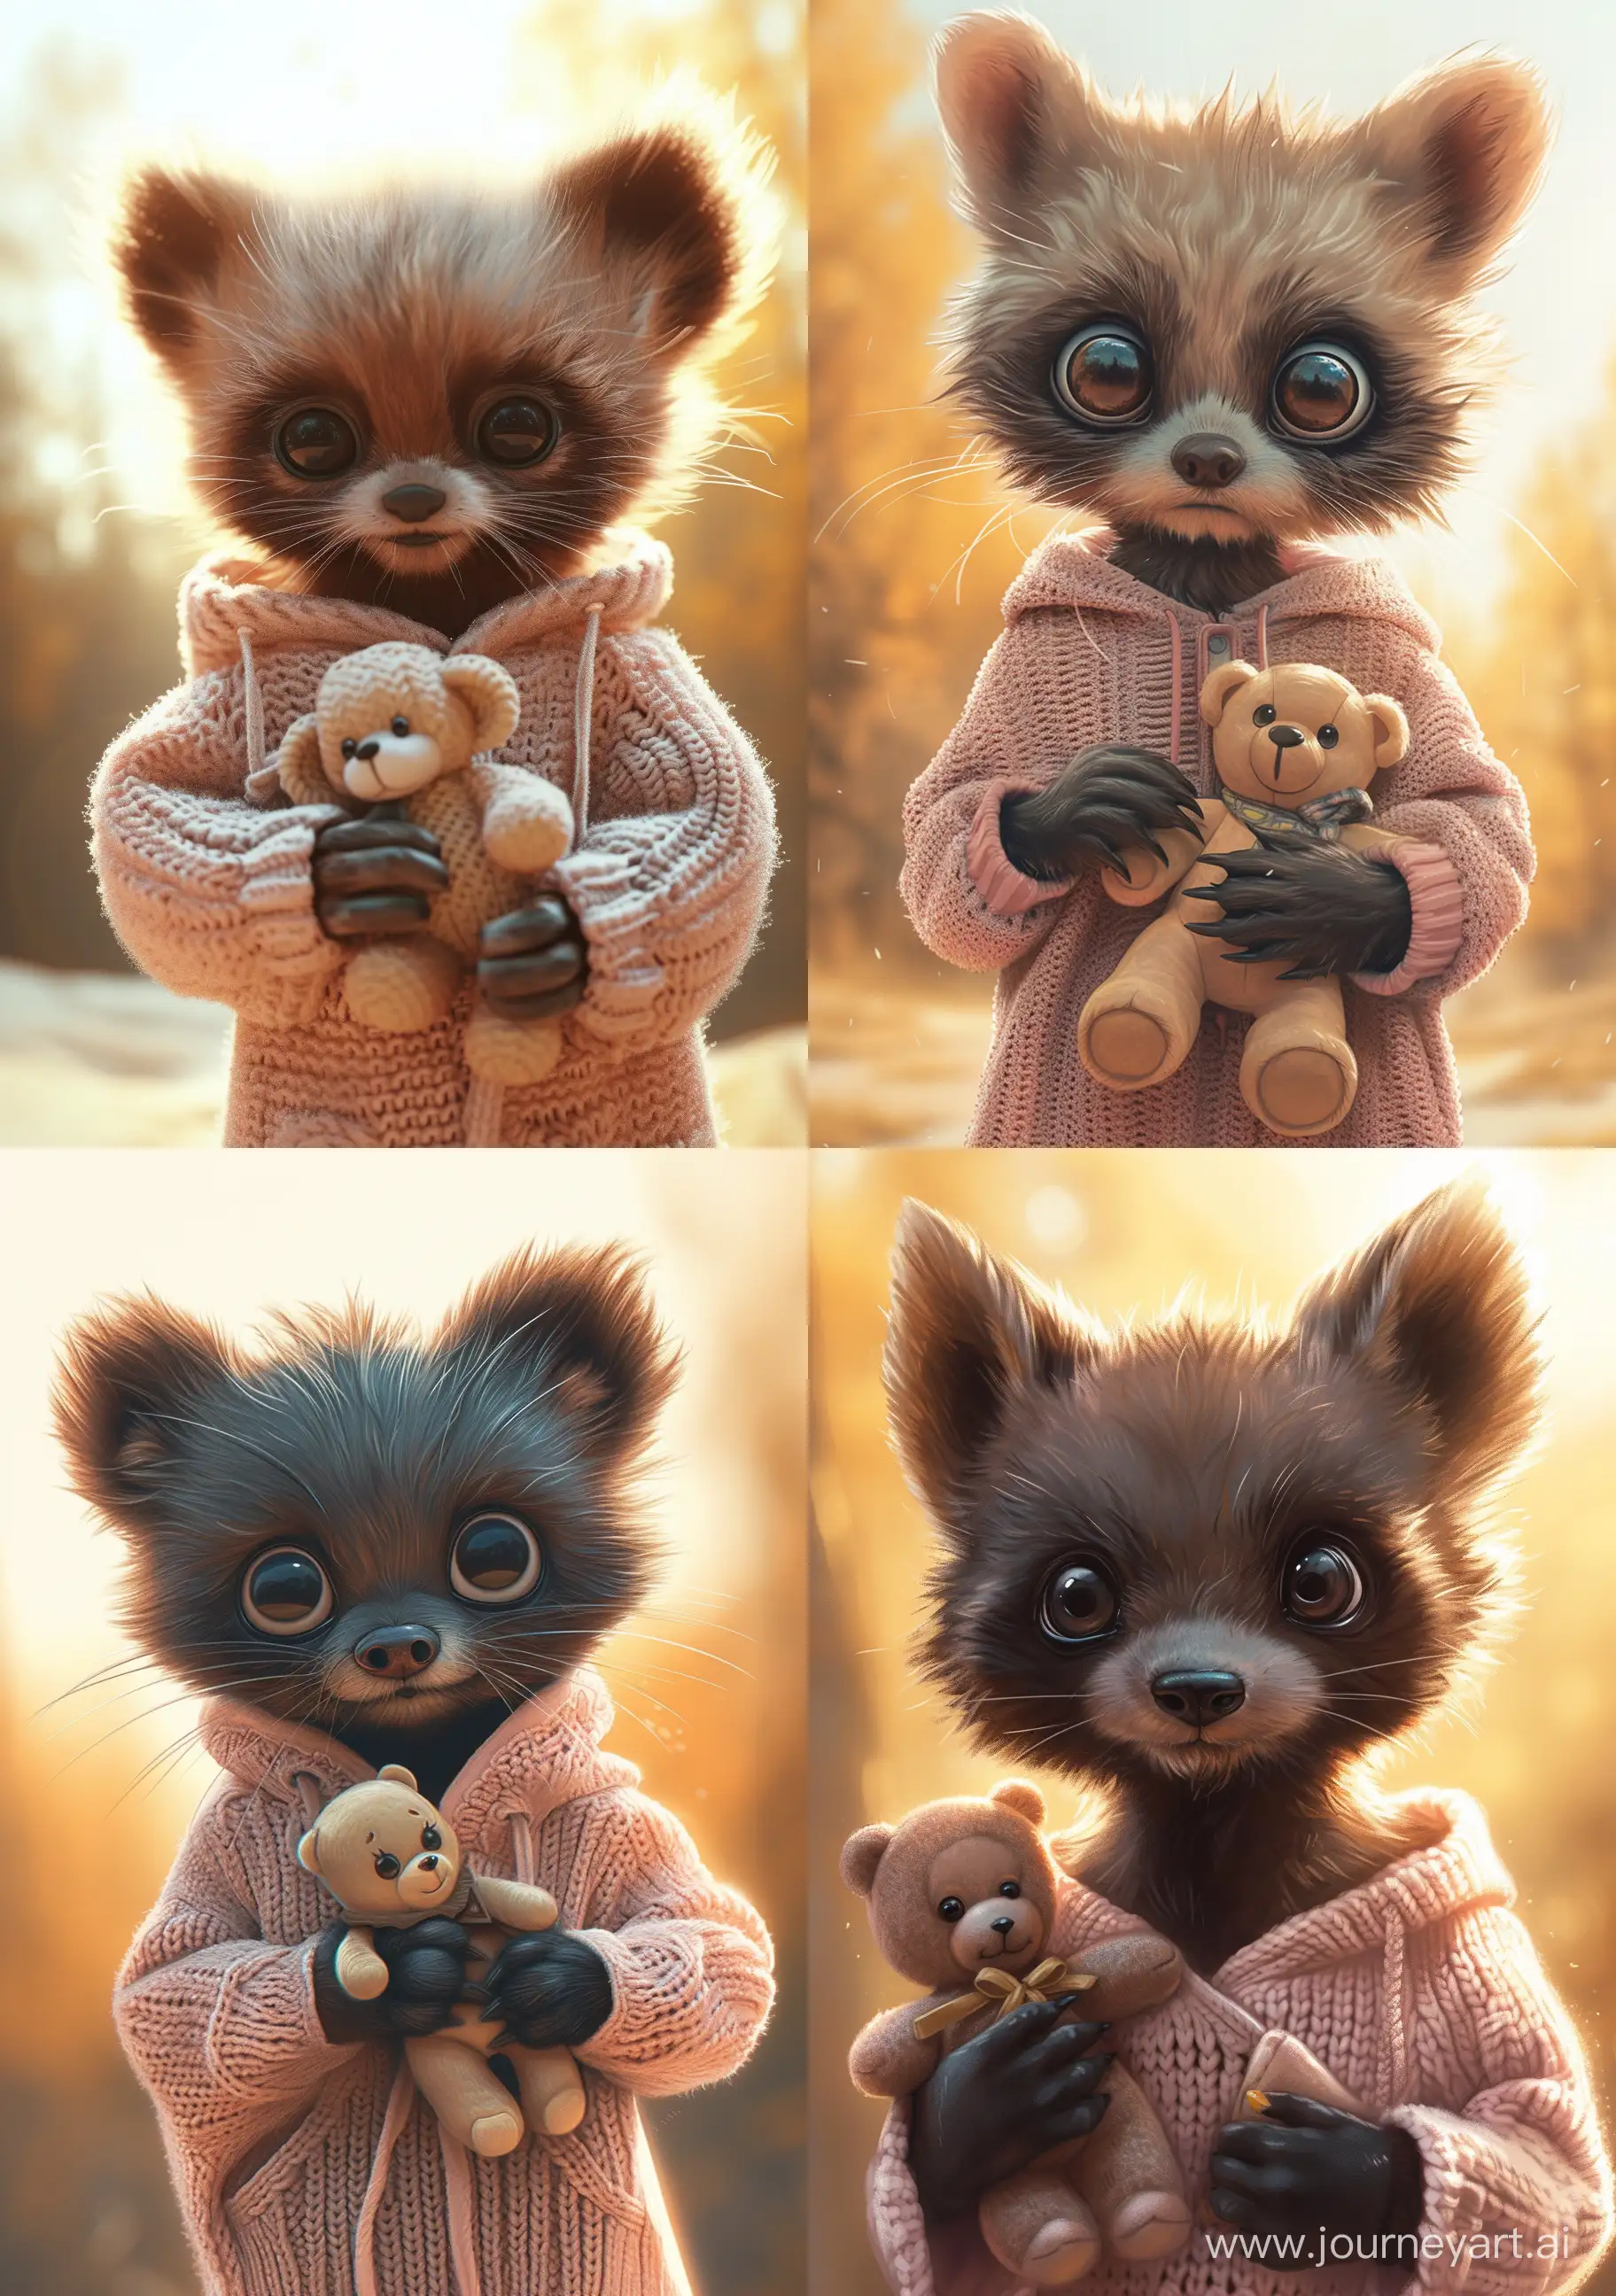 Charming-Little-Wolverine-Embracing-a-Teddy-Bear-in-Sunlit-Serenity